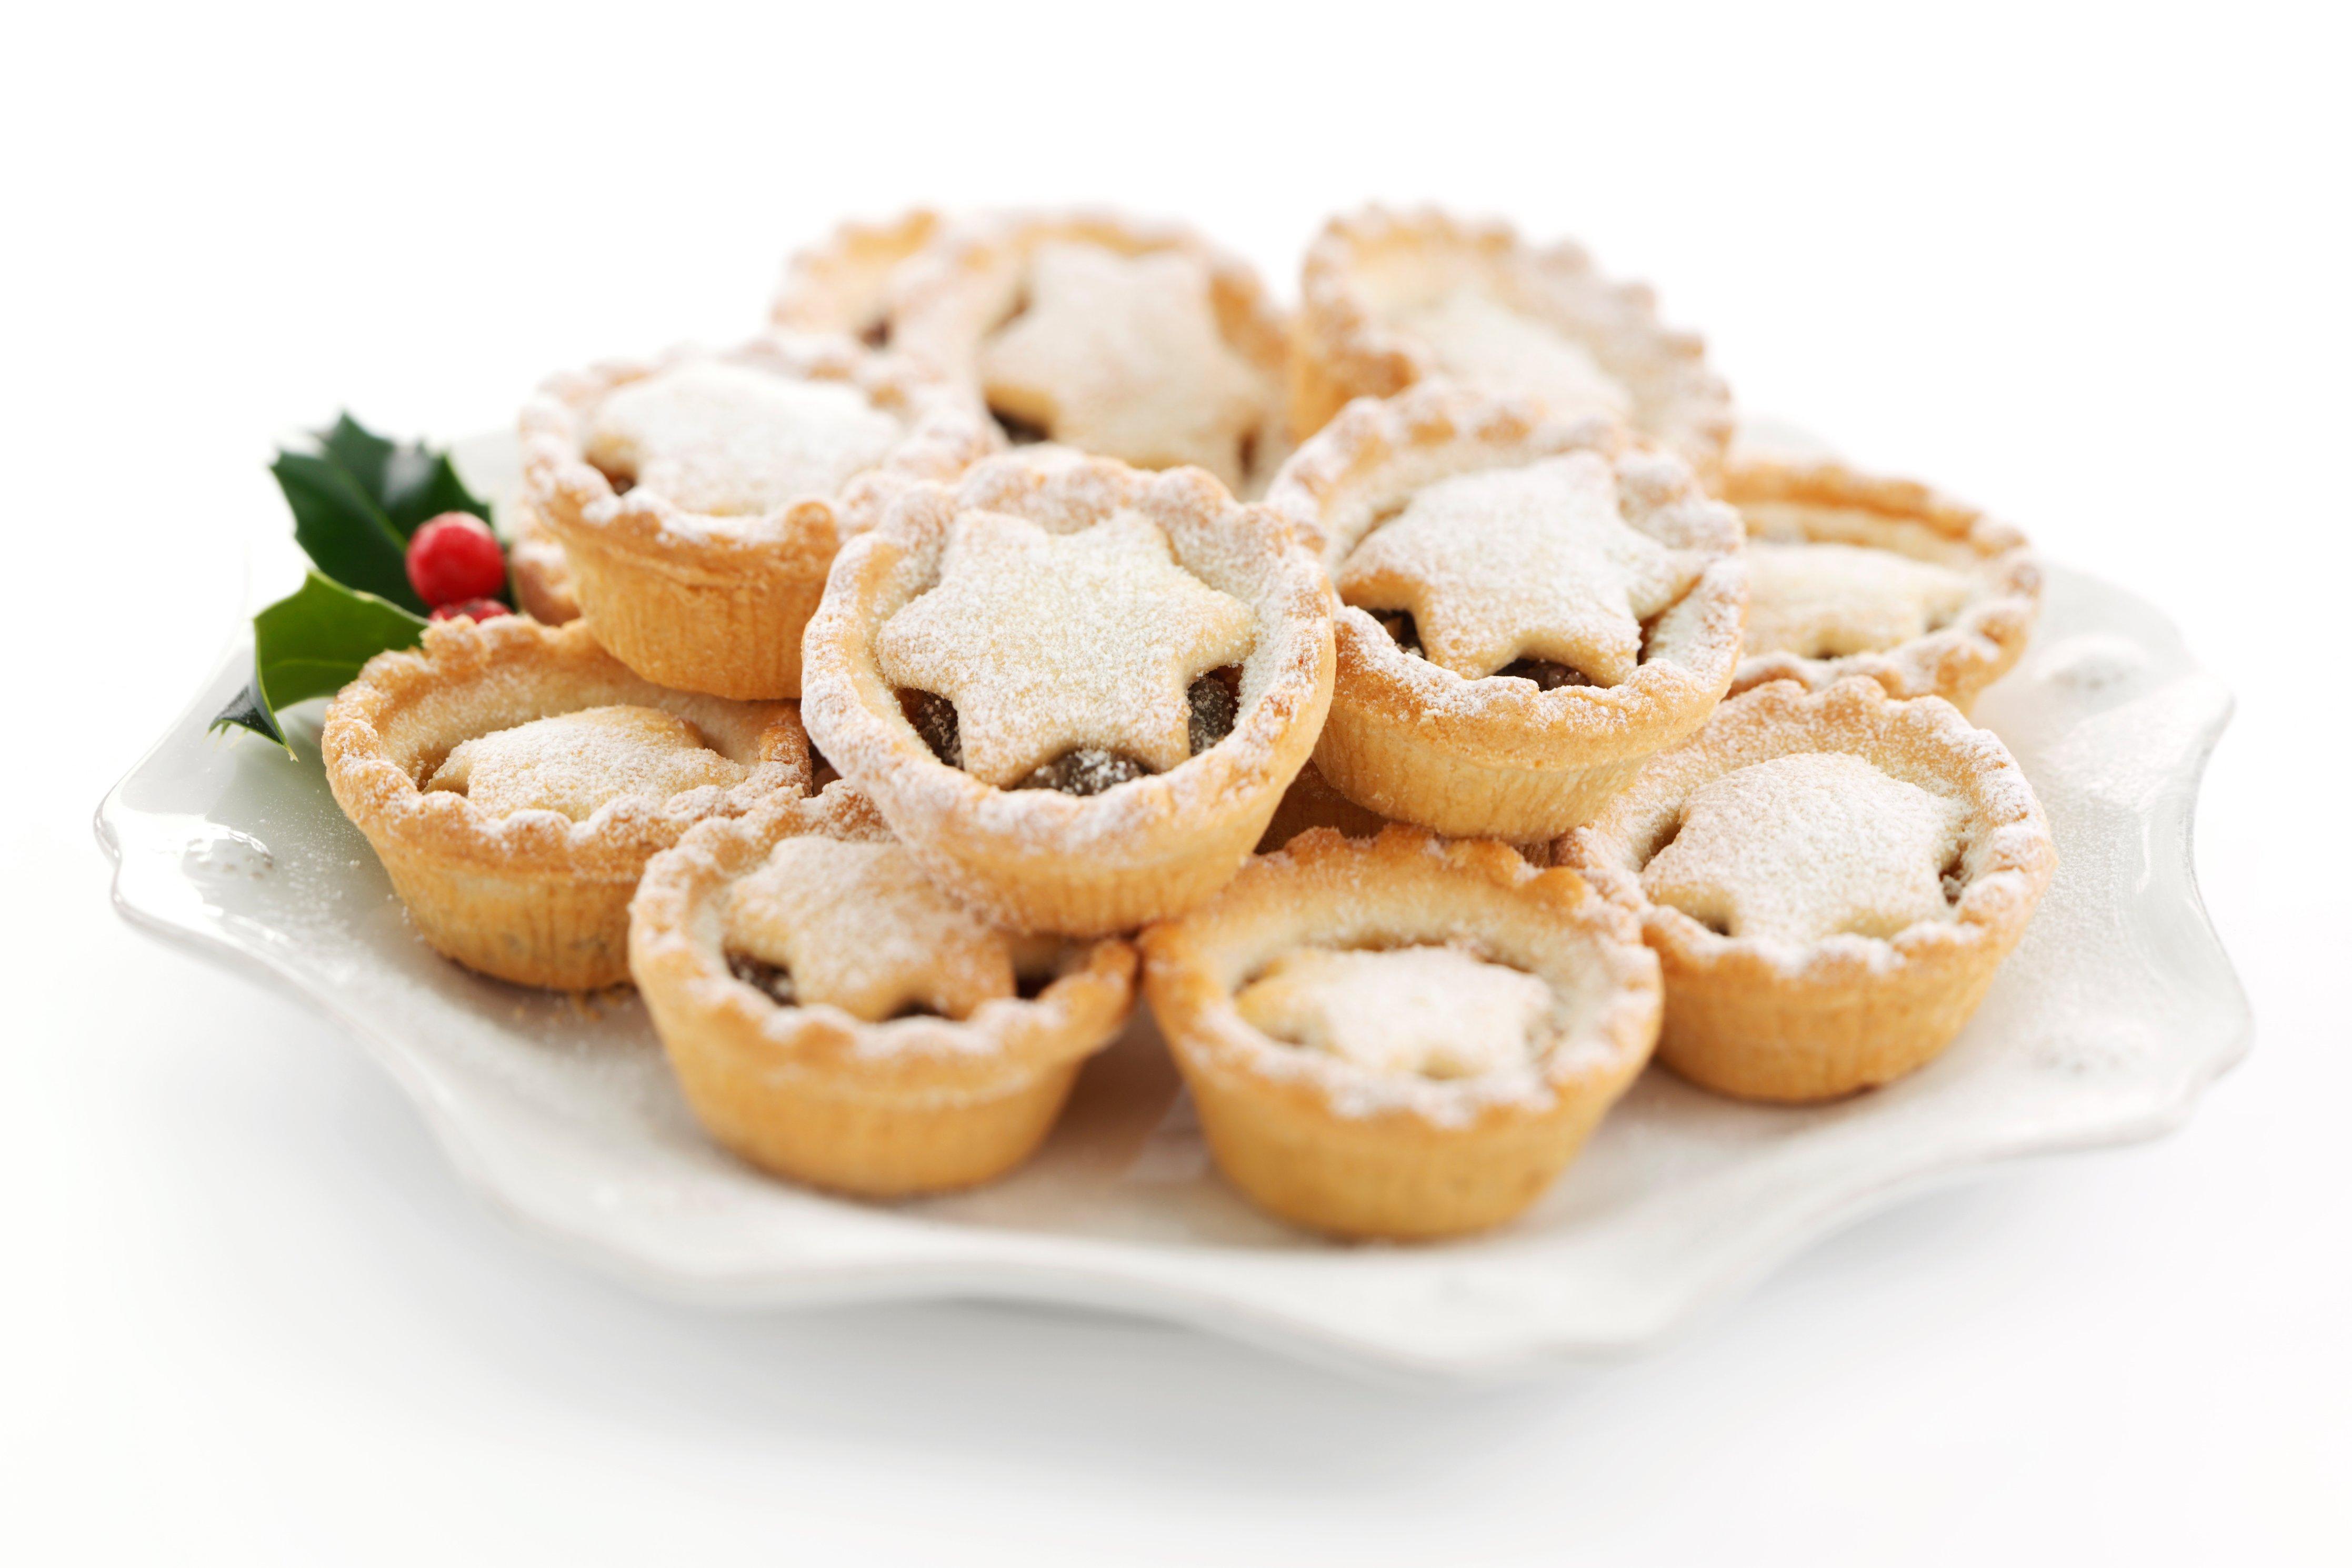 free clipart images mince pies pastry